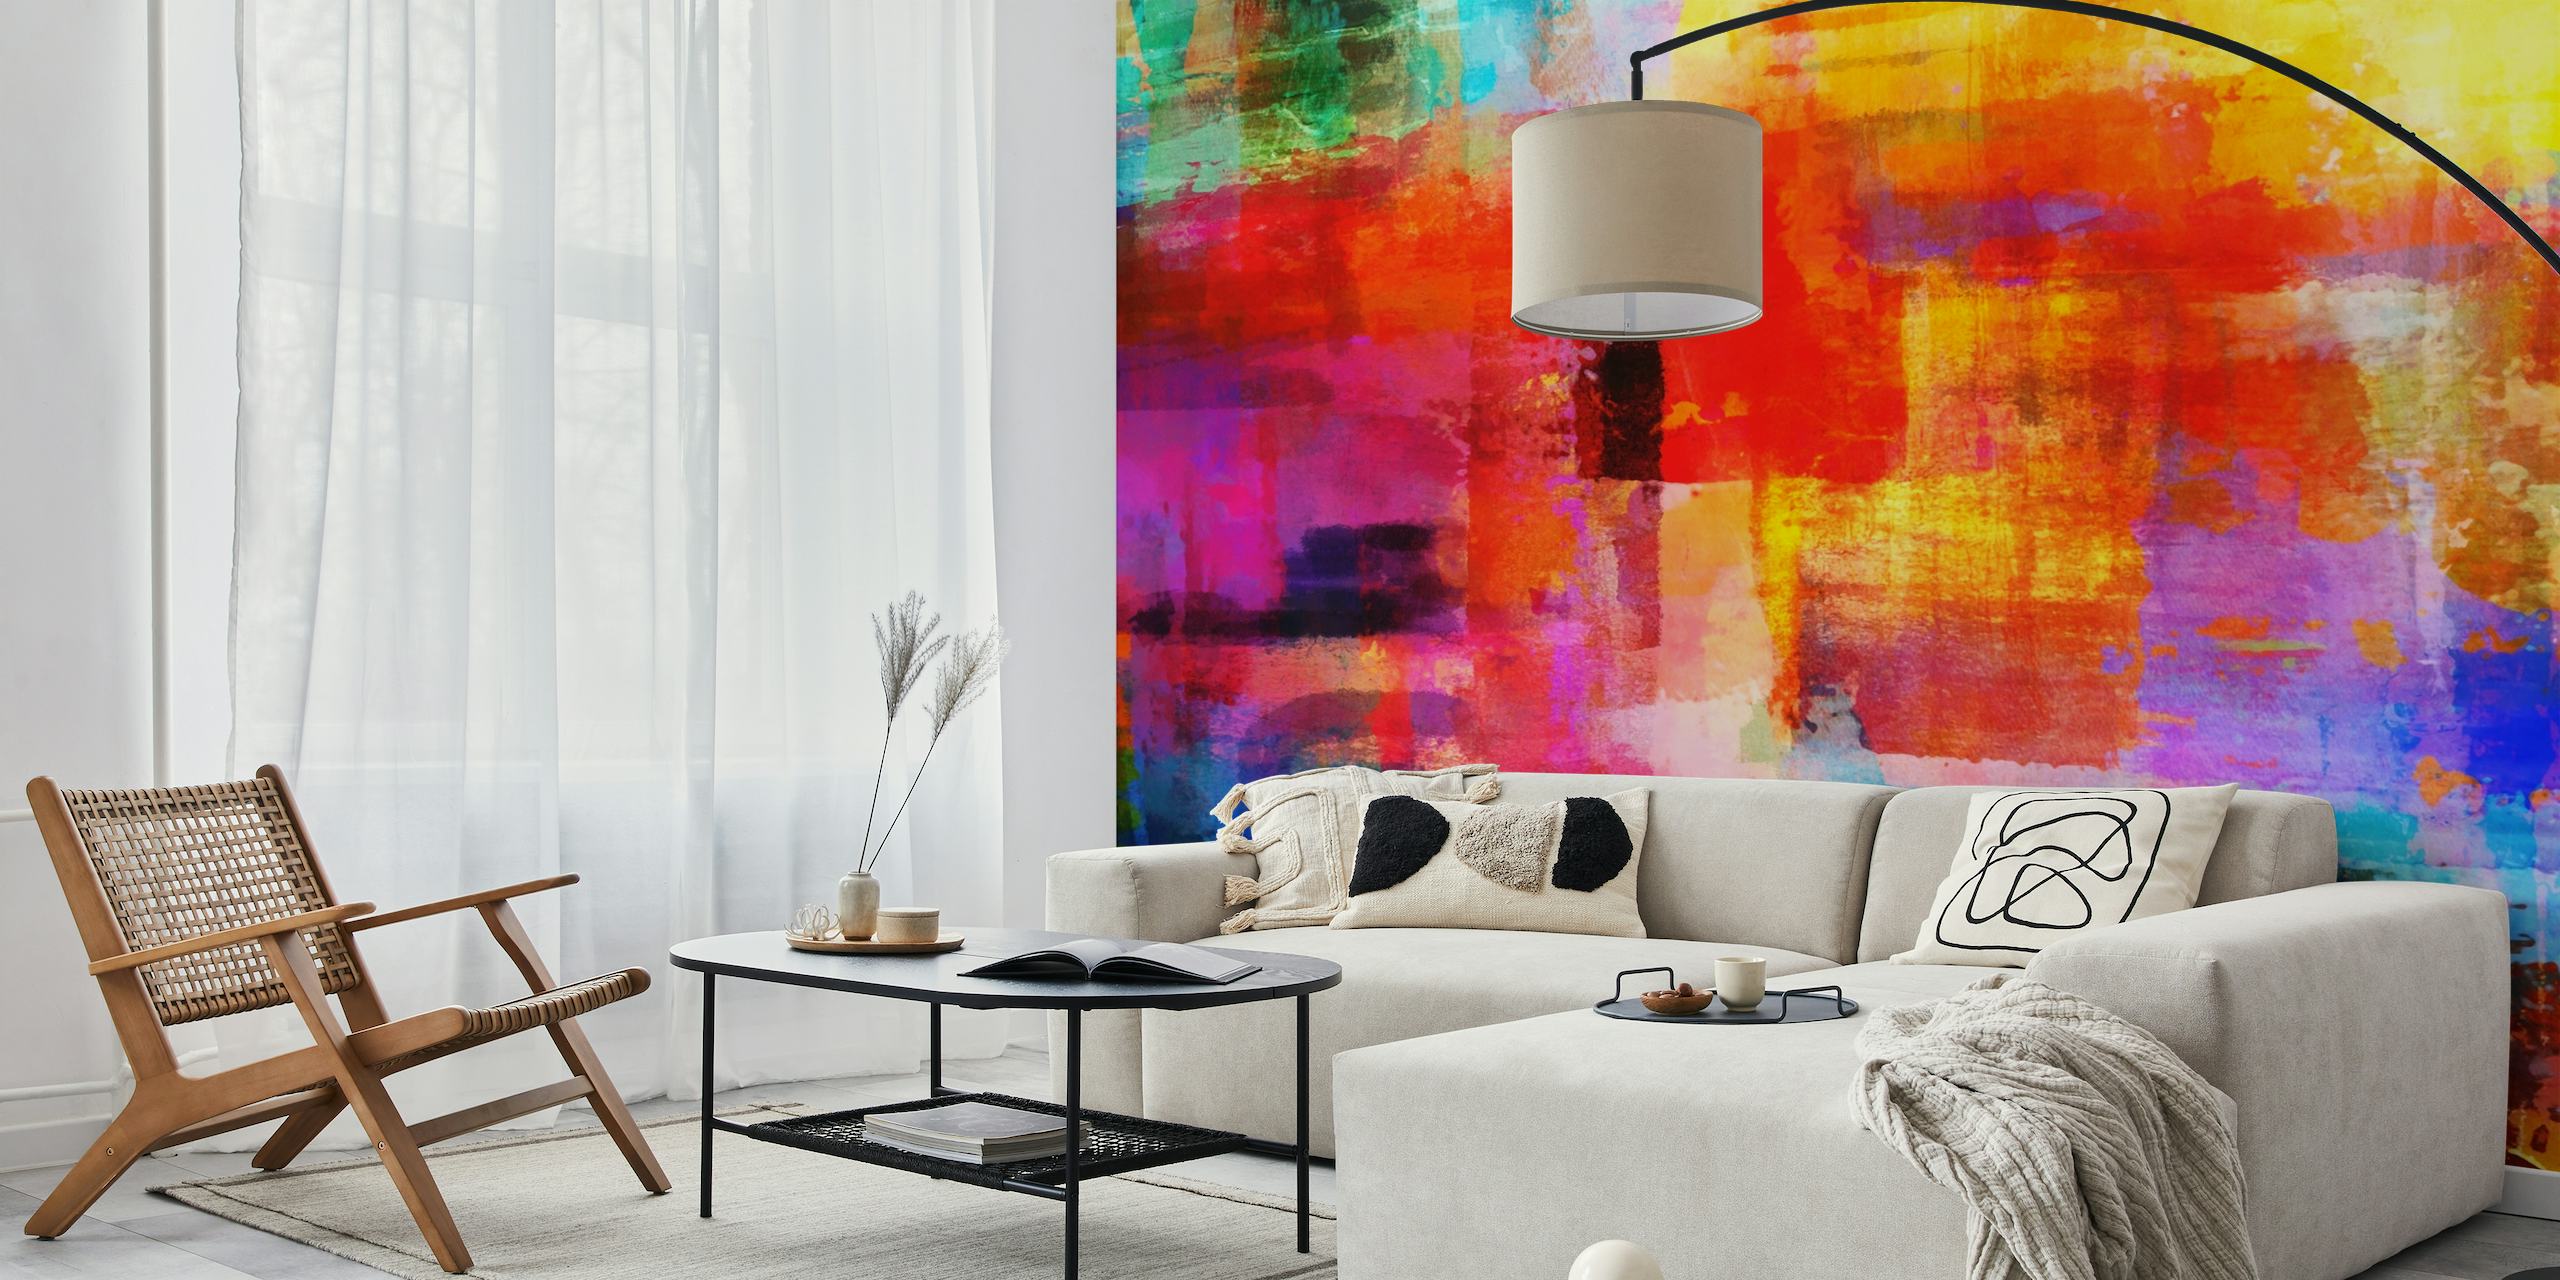 Abstract rustic geometric wall mural with a colorful patchwork design